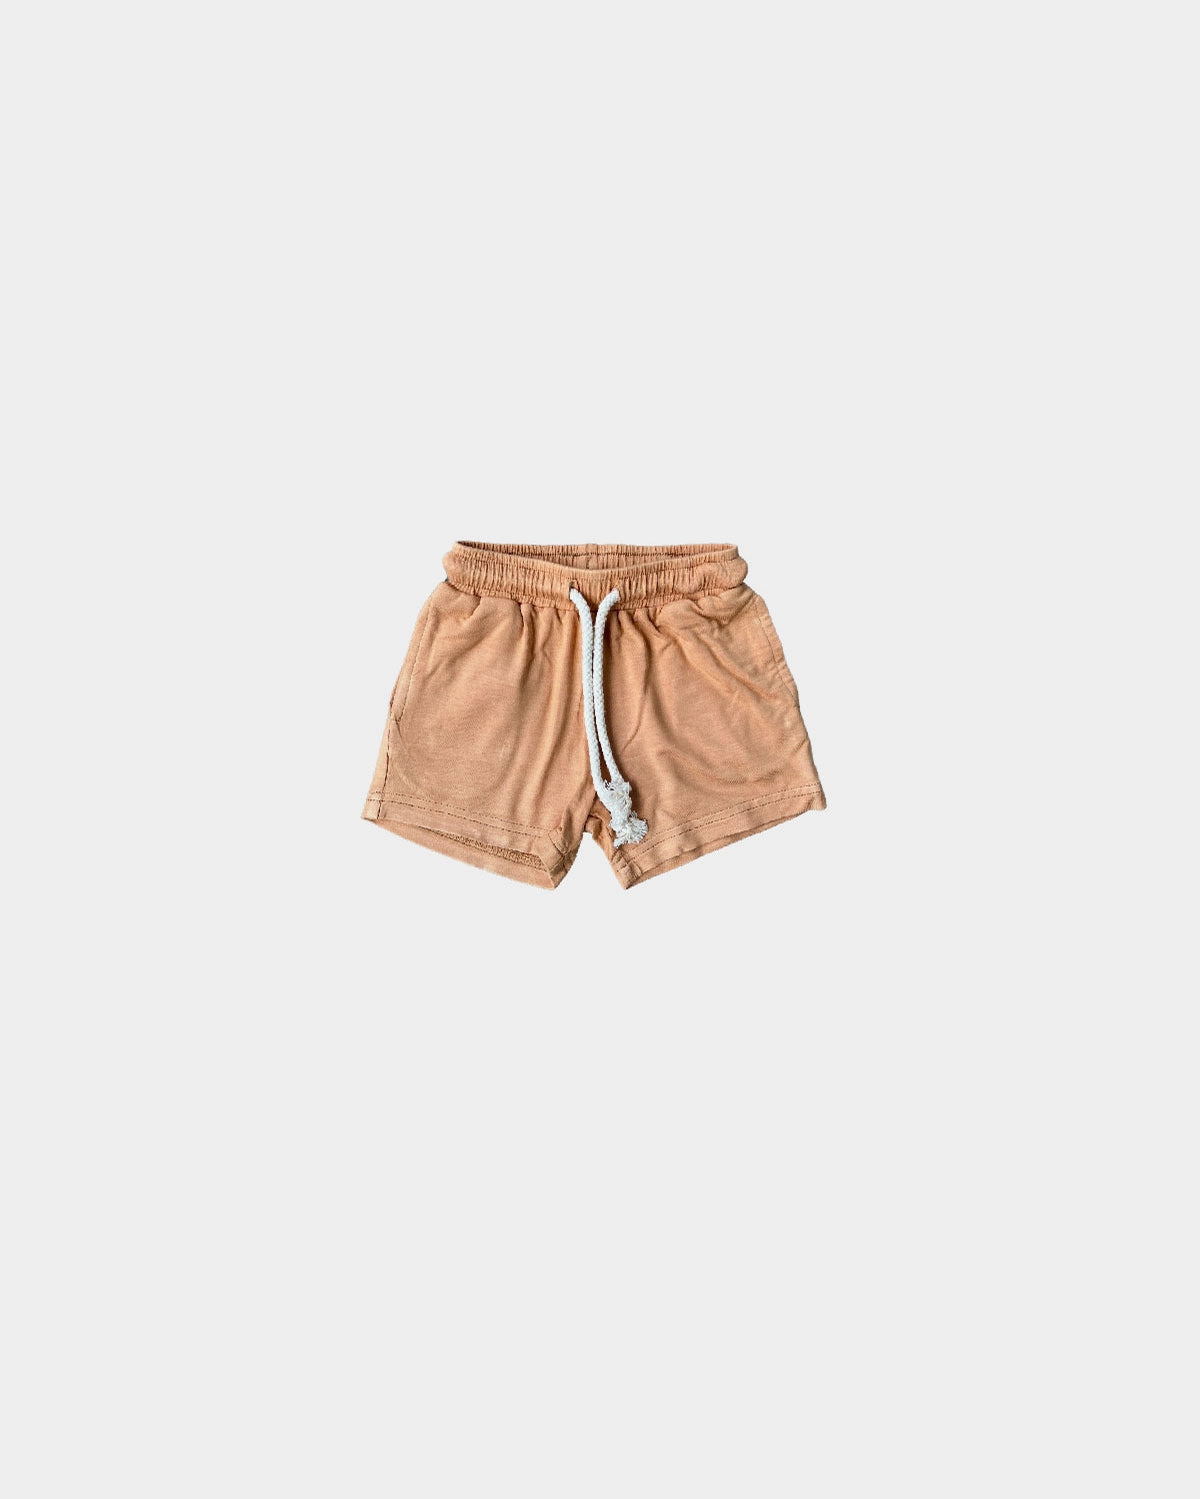 baby sprouts bamboo cotton shorts orange butterscotch 